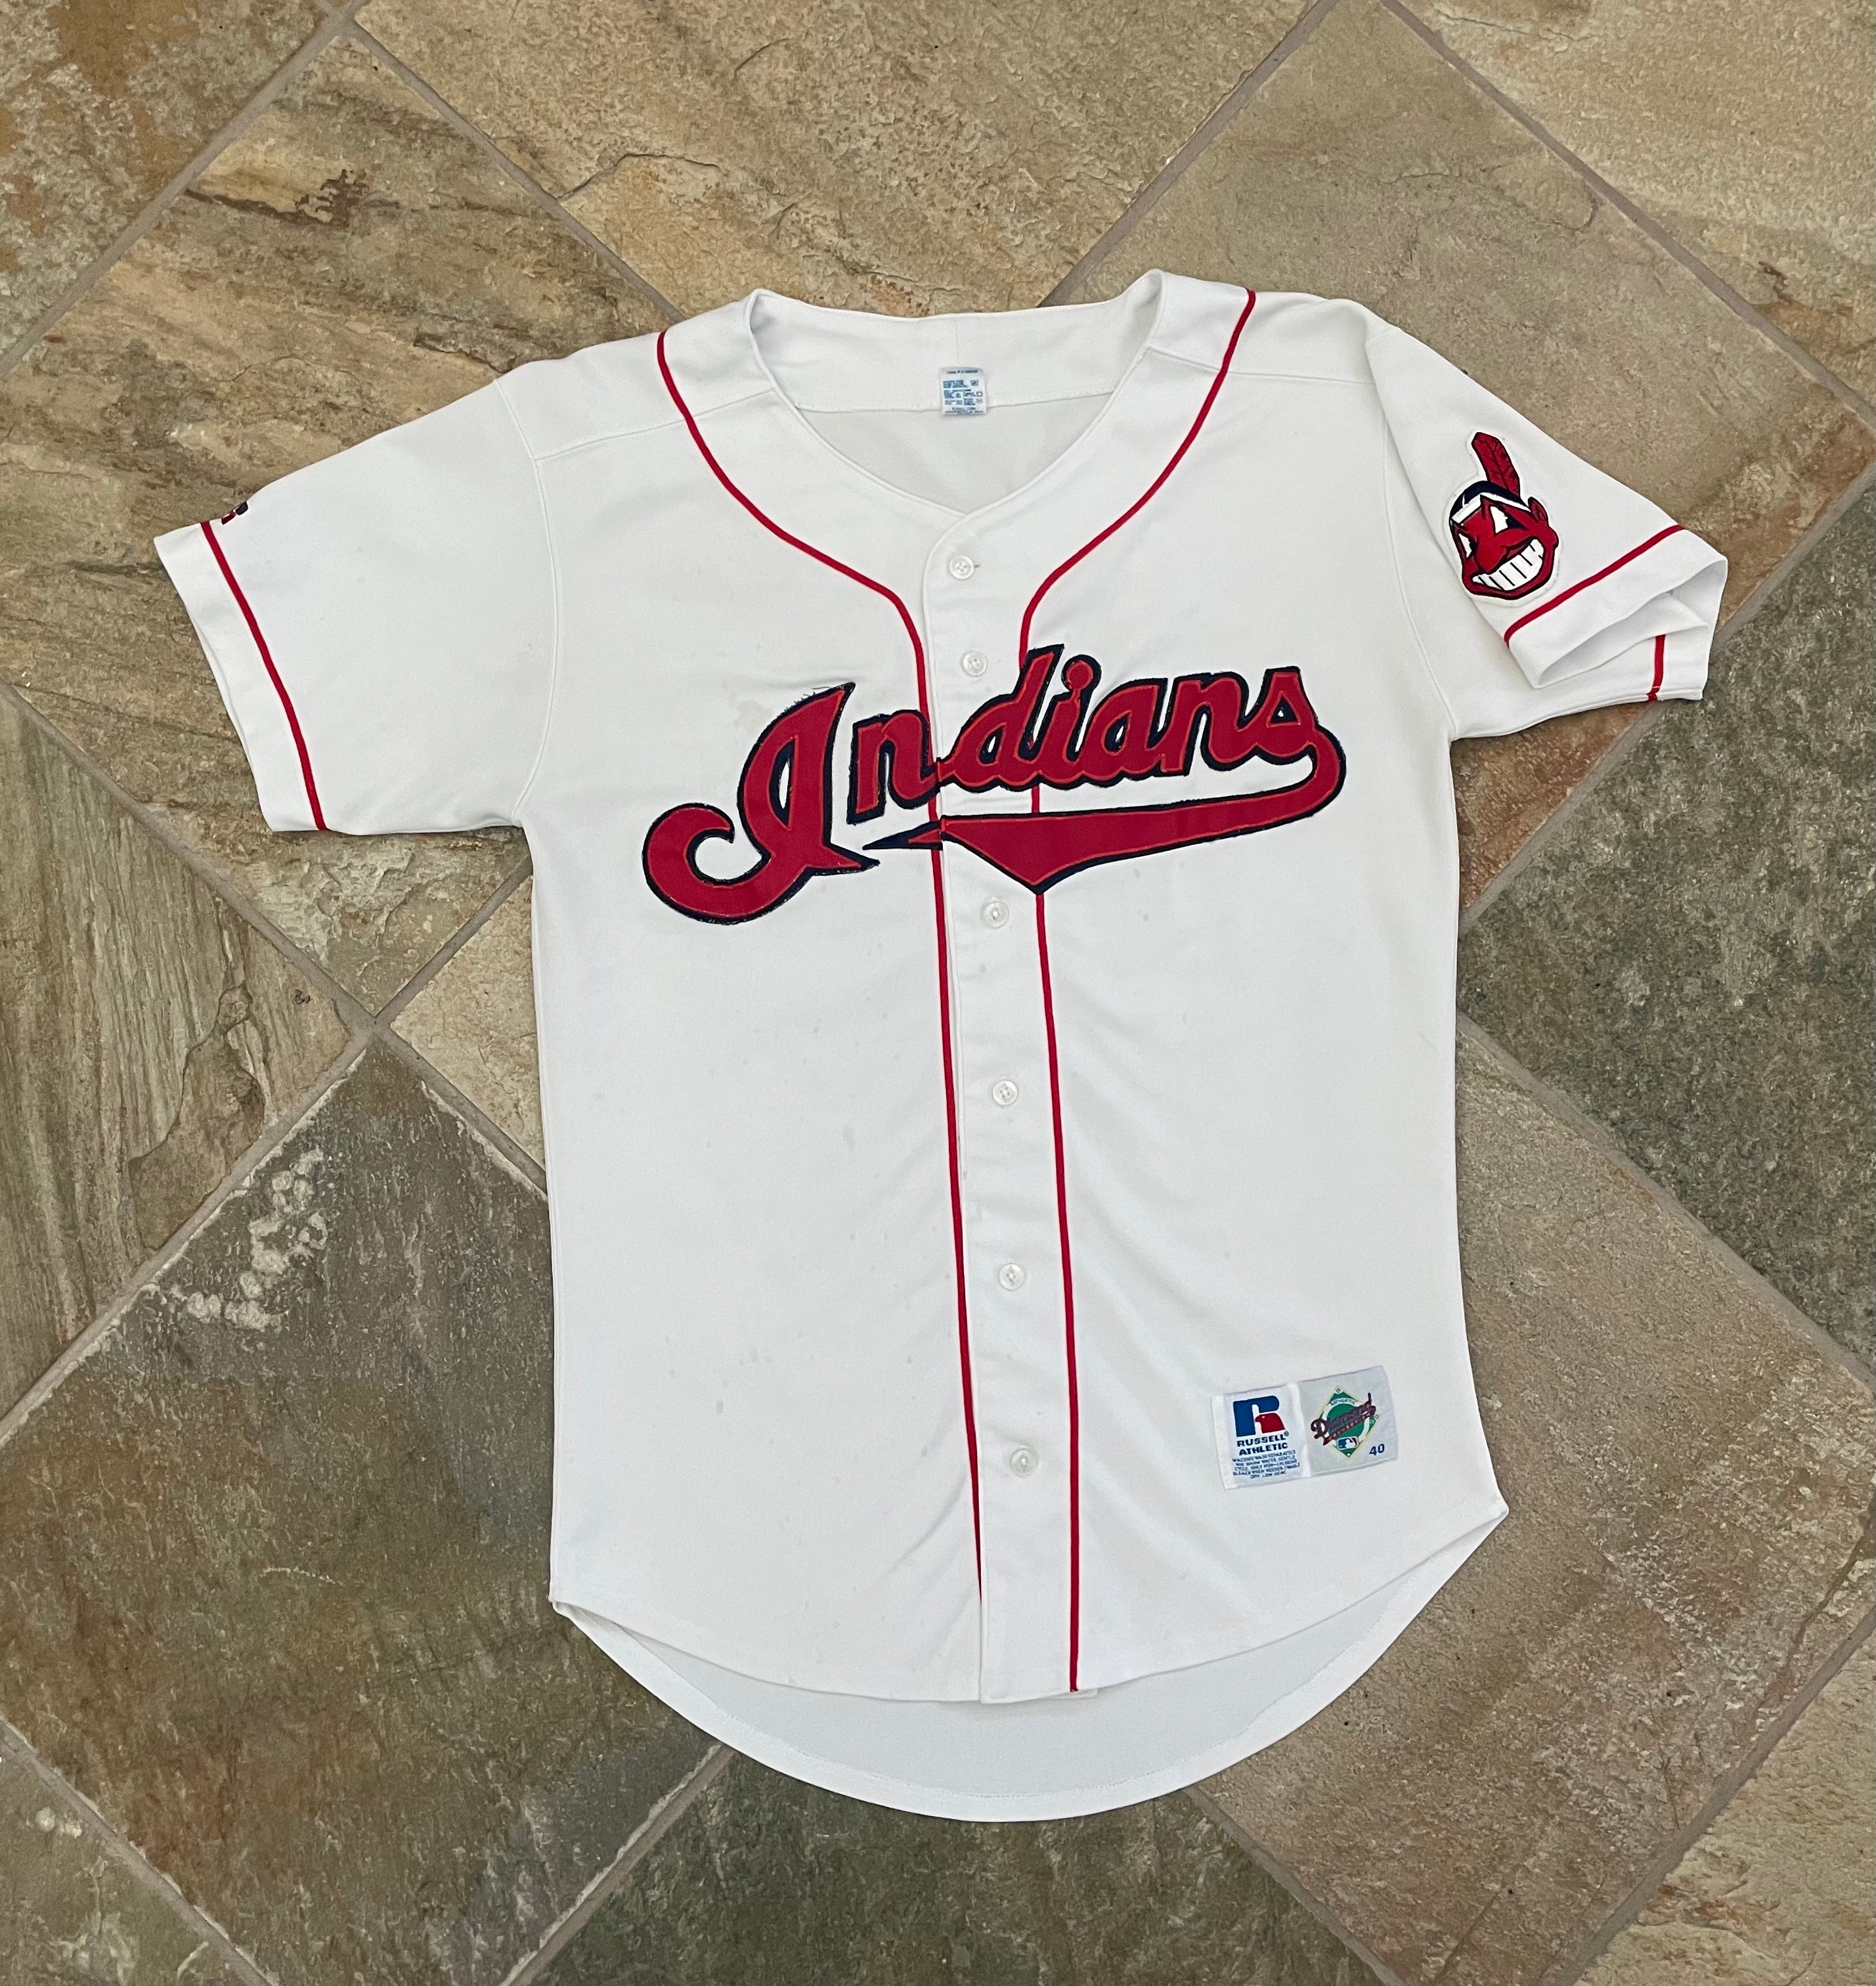 Cleveland Indians: 1997 Russell Athletic Blur Jersey Tee w/ Tags (M) –  National Vintage League Ltd.